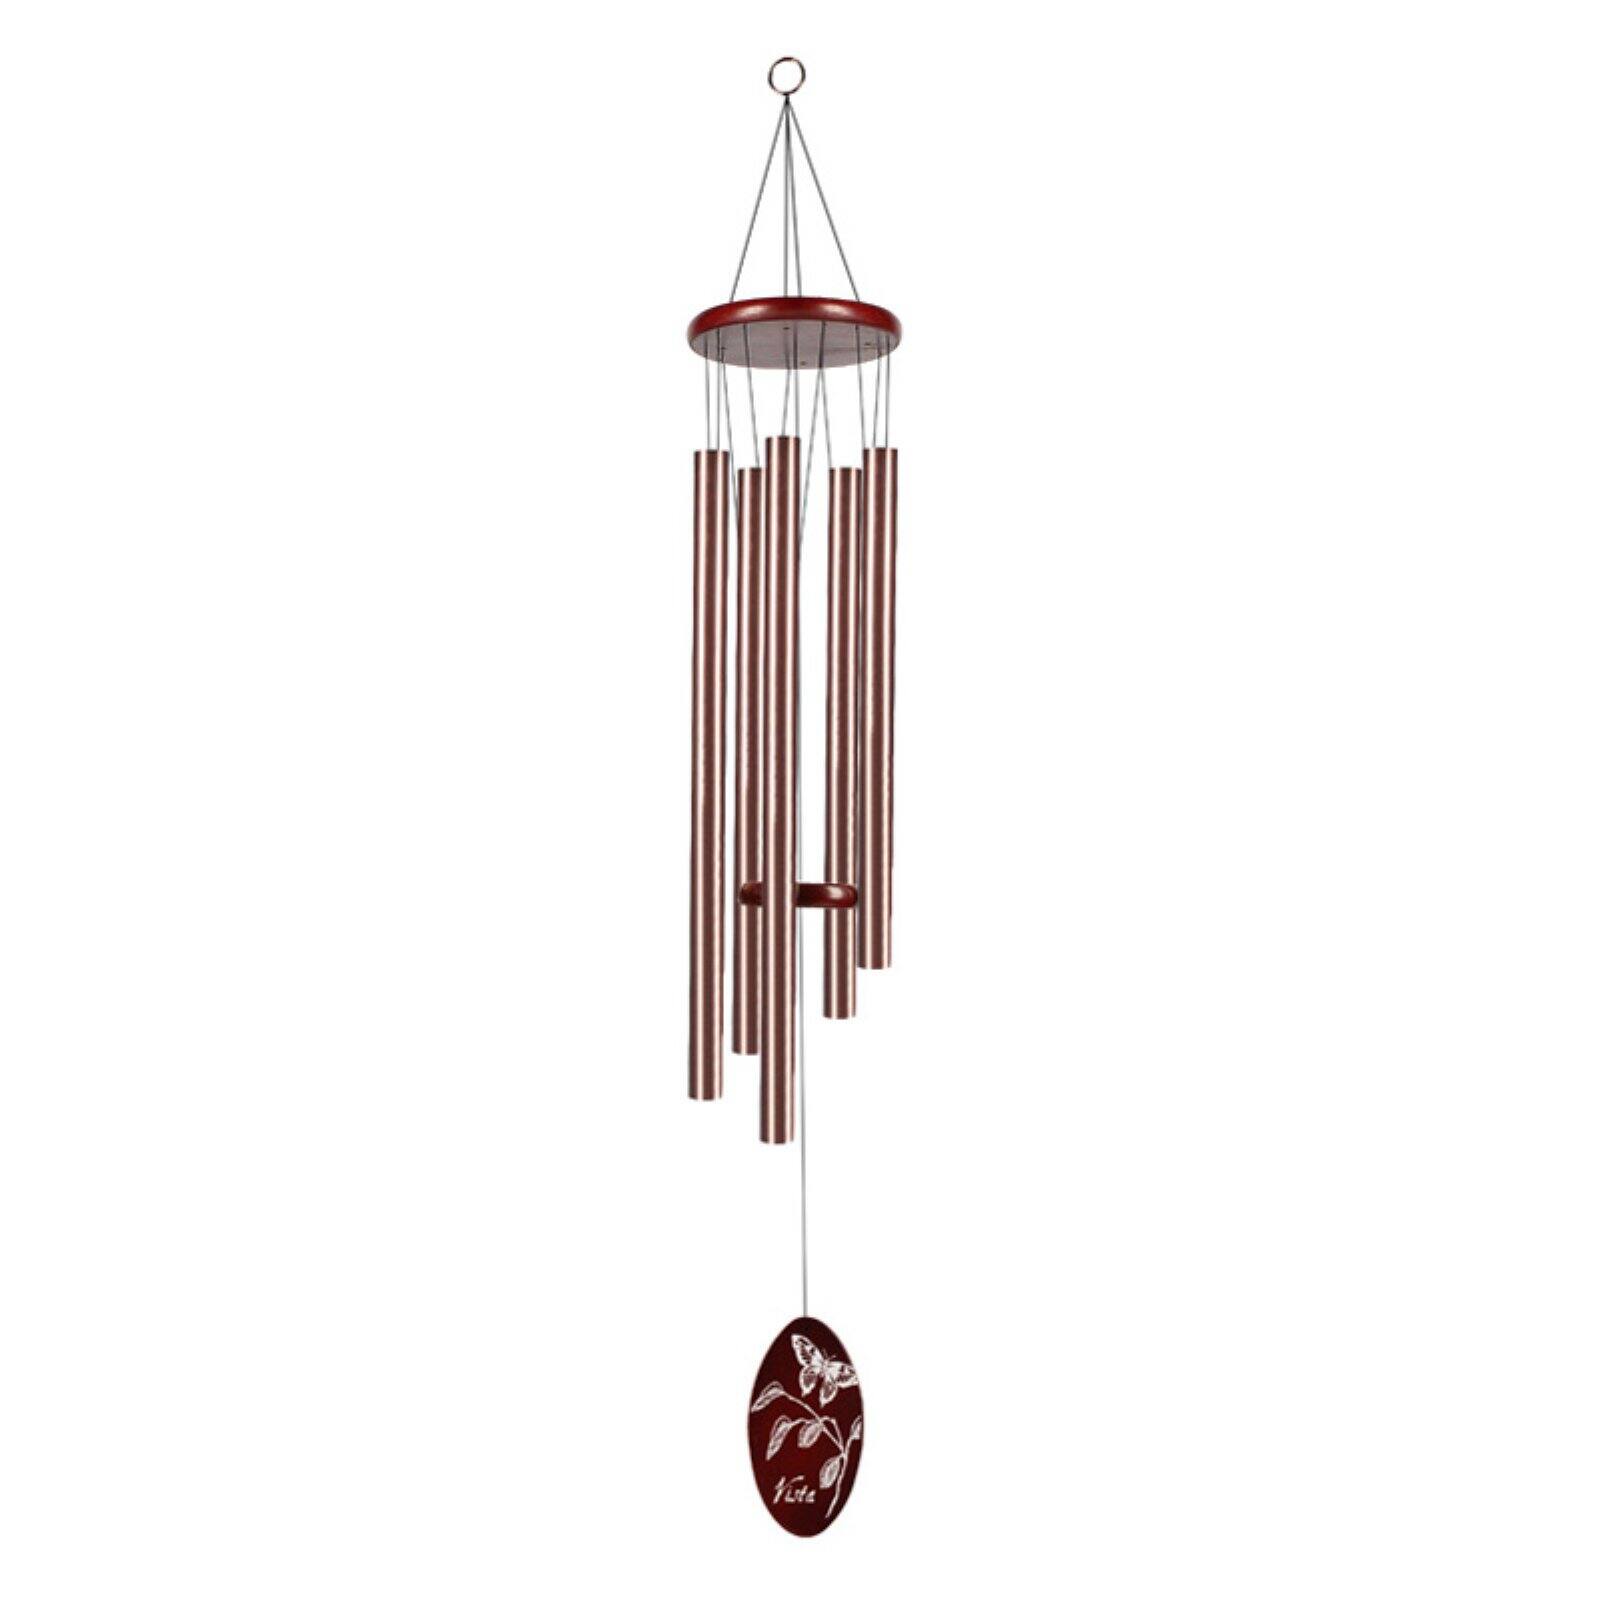 Sunset Vista Designs 36 In. Bronze Wind Chime 90647 - image 1 of 2